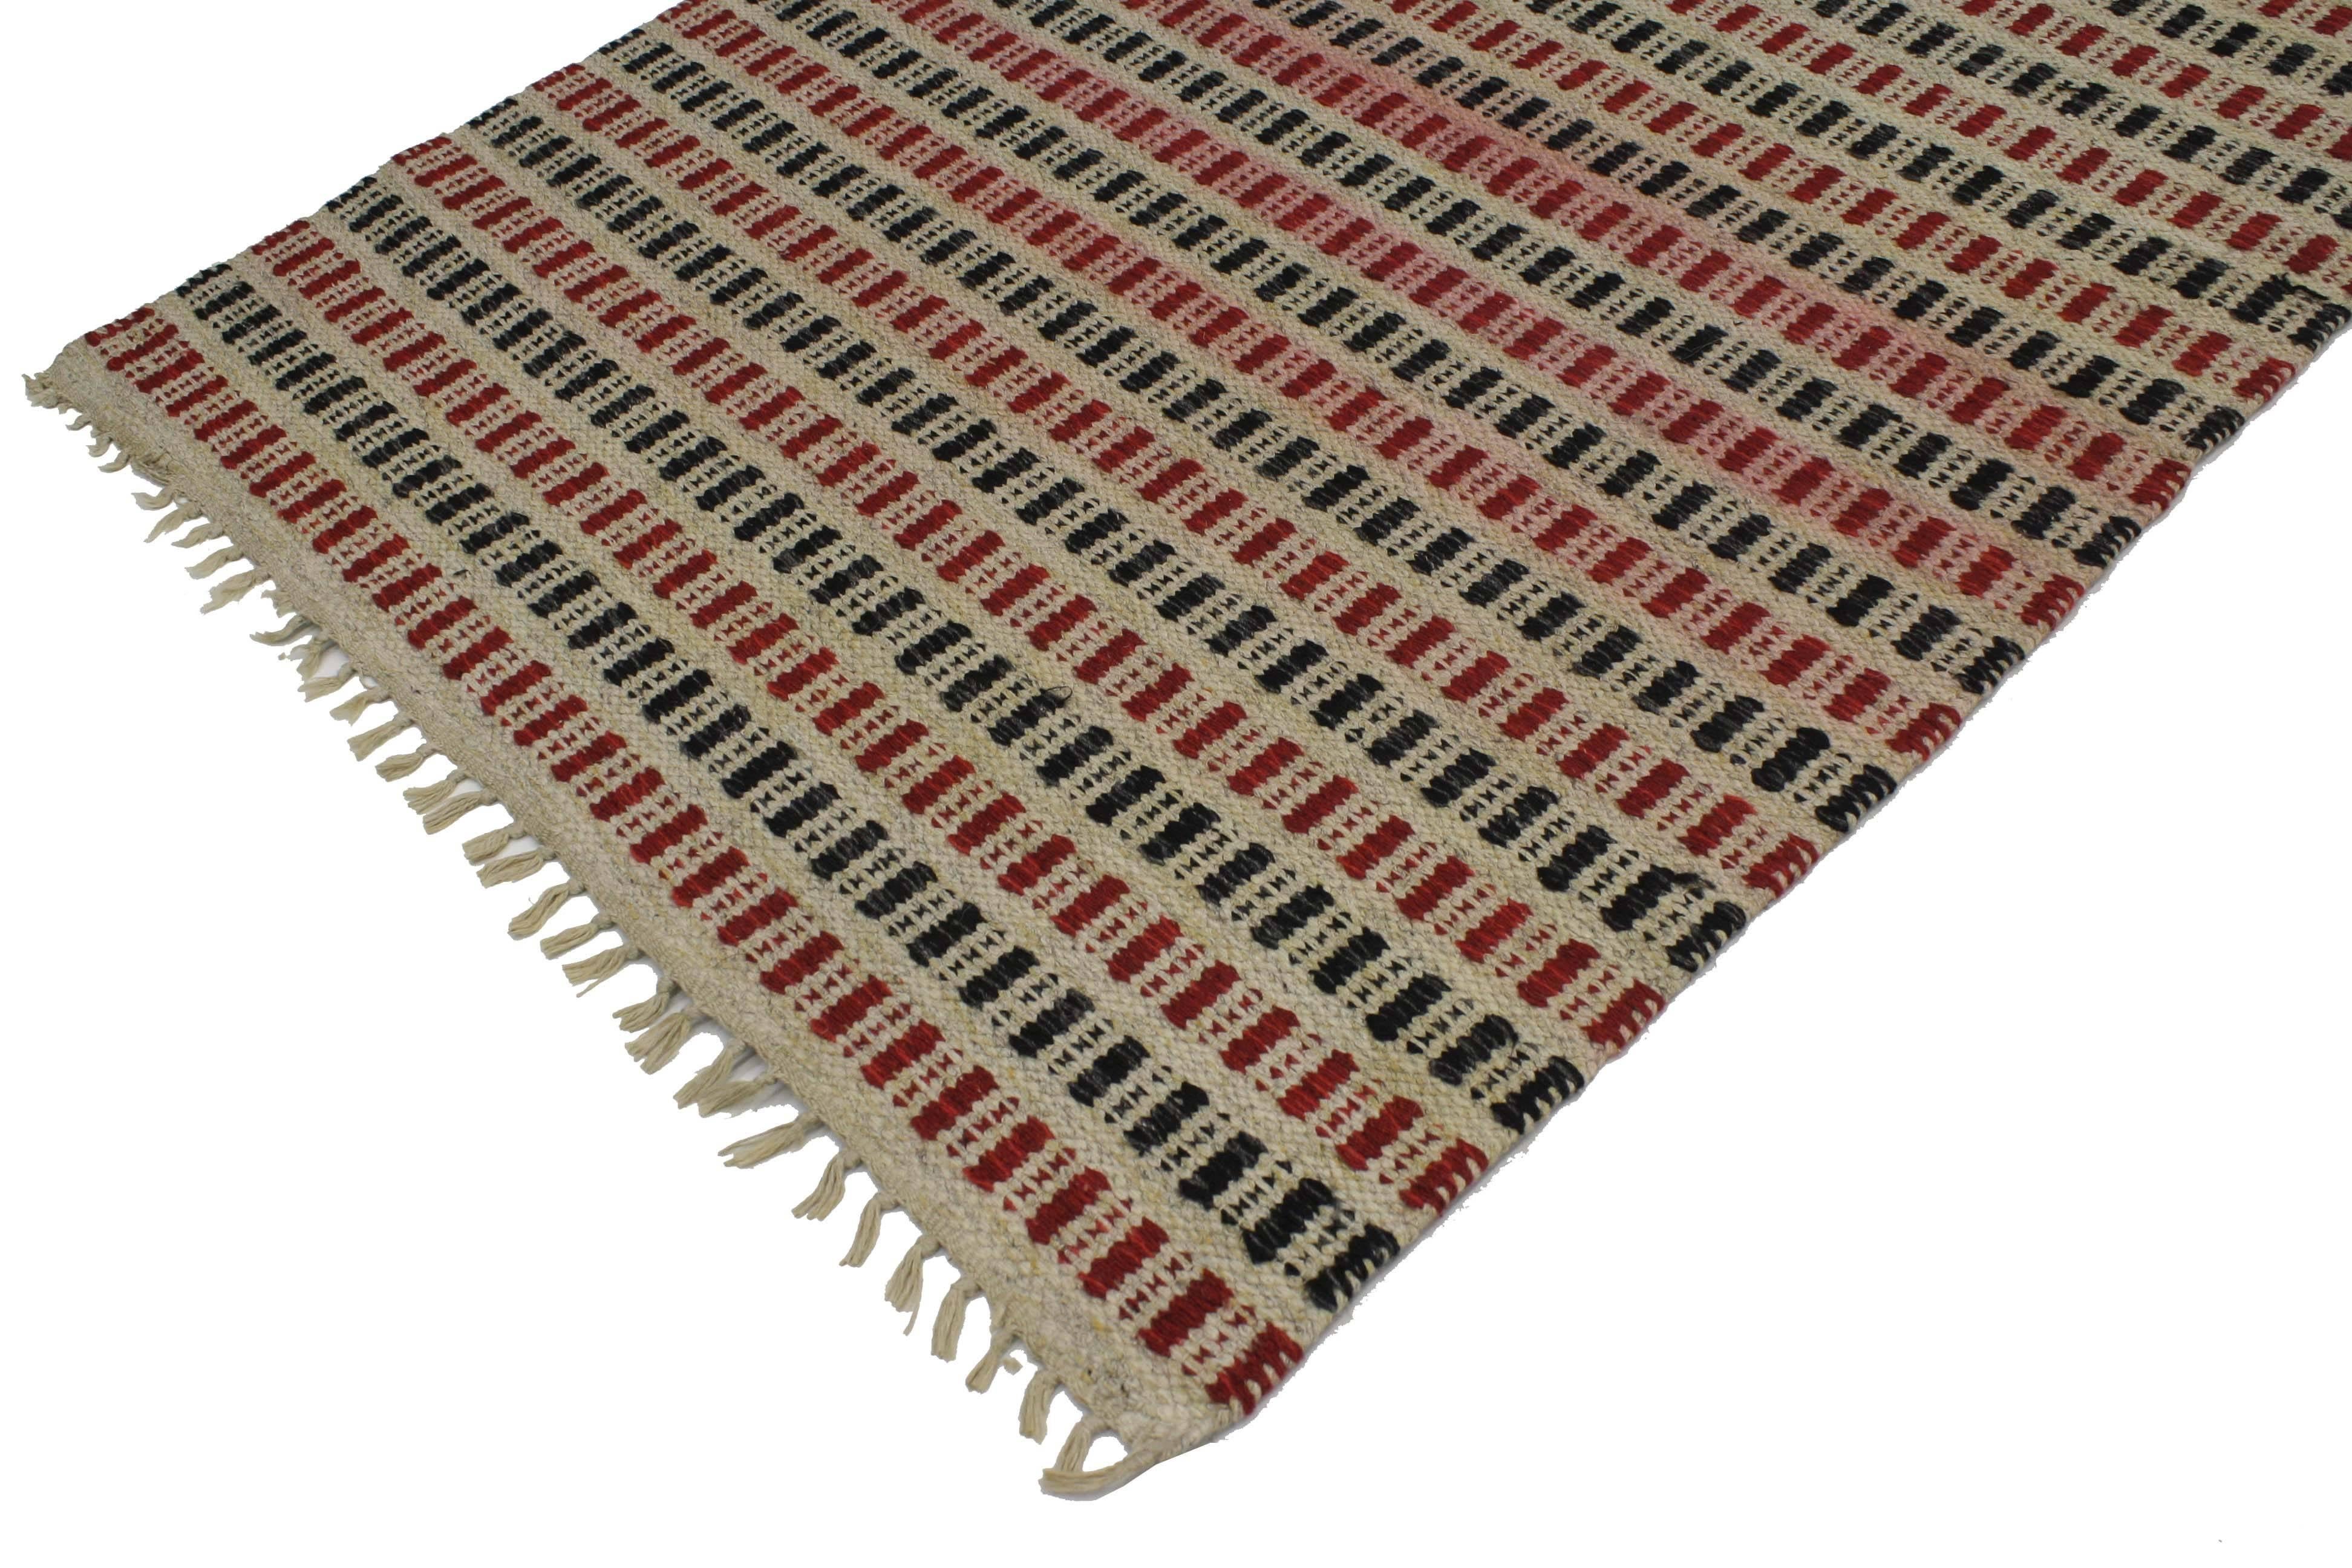 Vintage Scandinavian Swedish Kilim Long Runner with Pacific Northwest Style For Sale 1